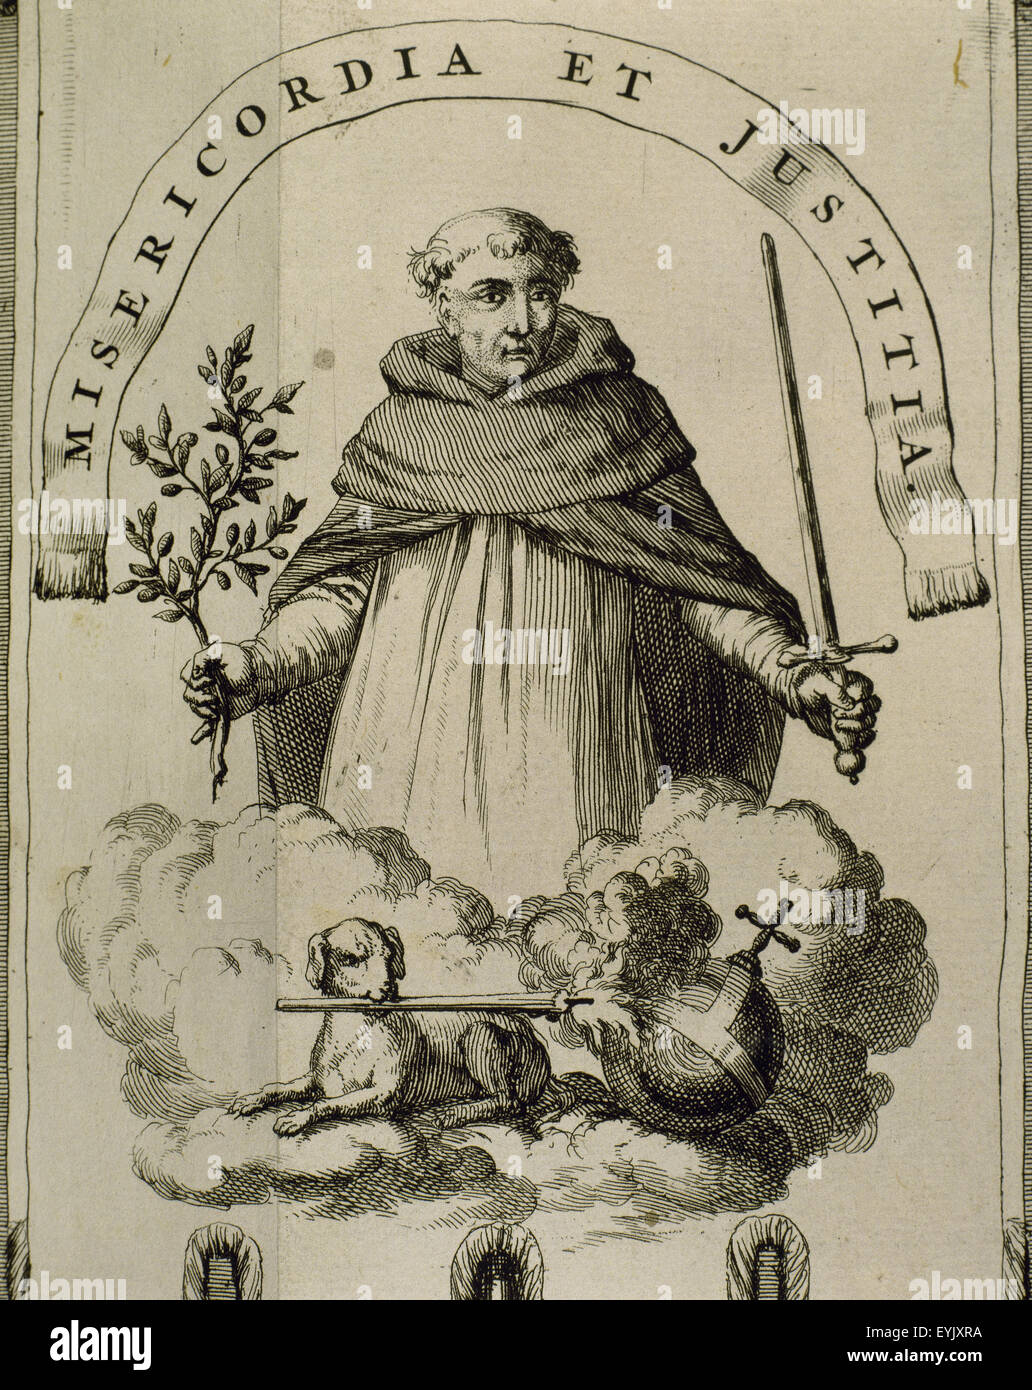 Banner of the Inquisition in Goa. Engraving, 1692. Stock Photo